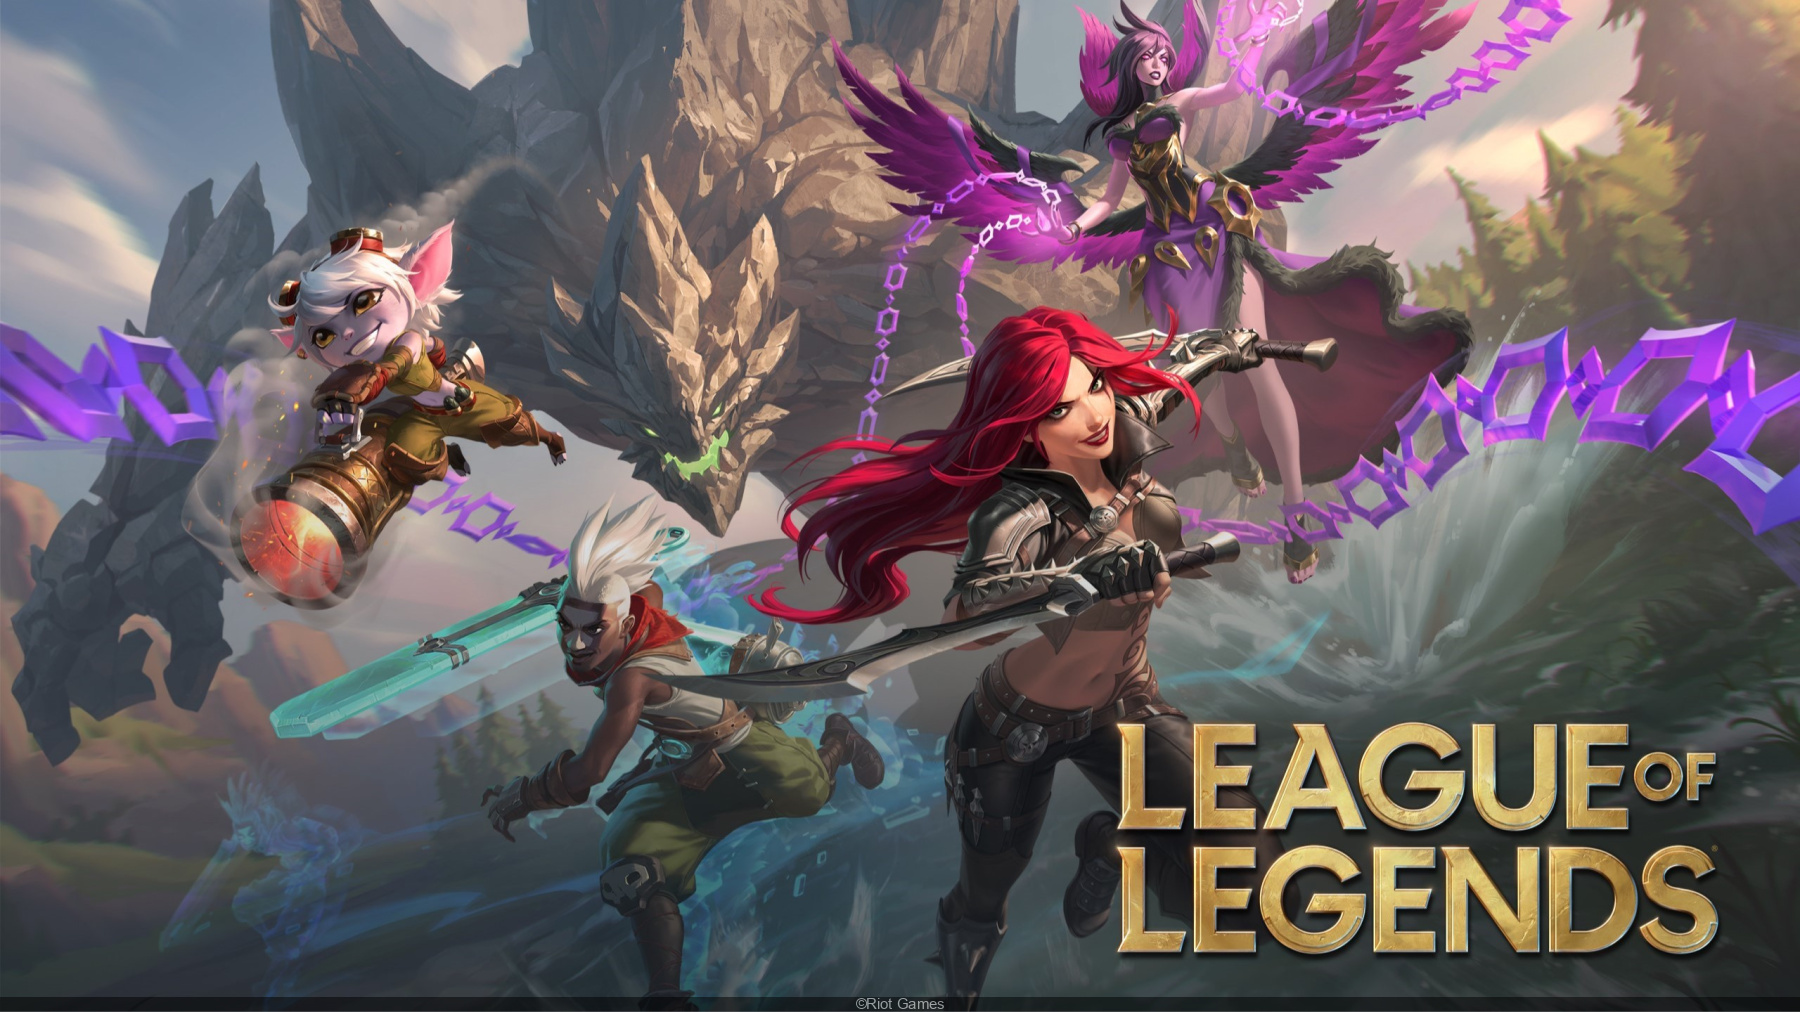 Louis Vuitton enters esports world with League of Legends video game